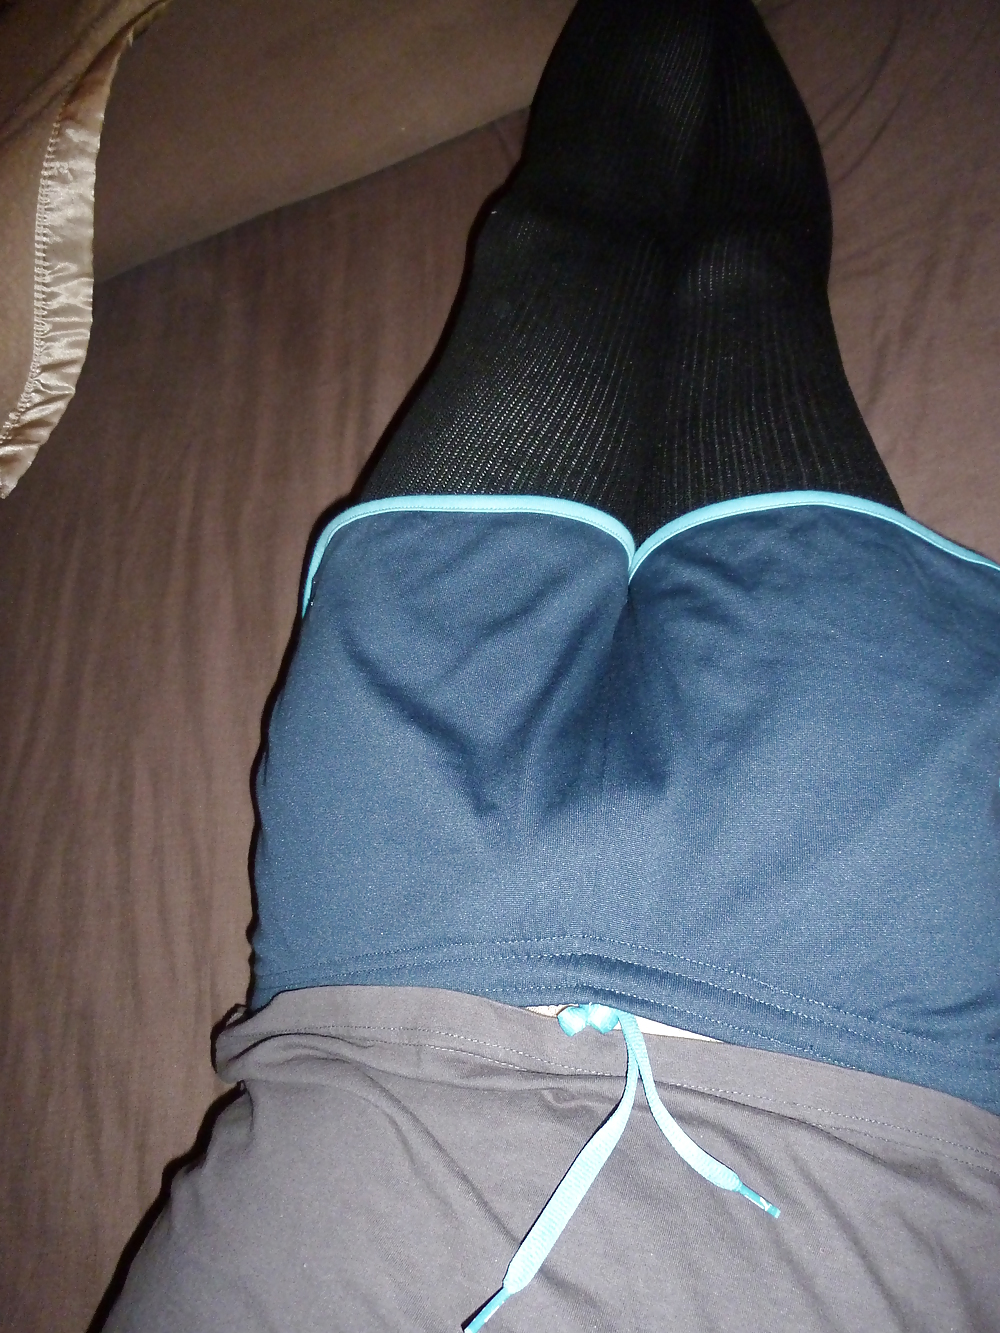 showing some sporty shorts socks stuff adult photos